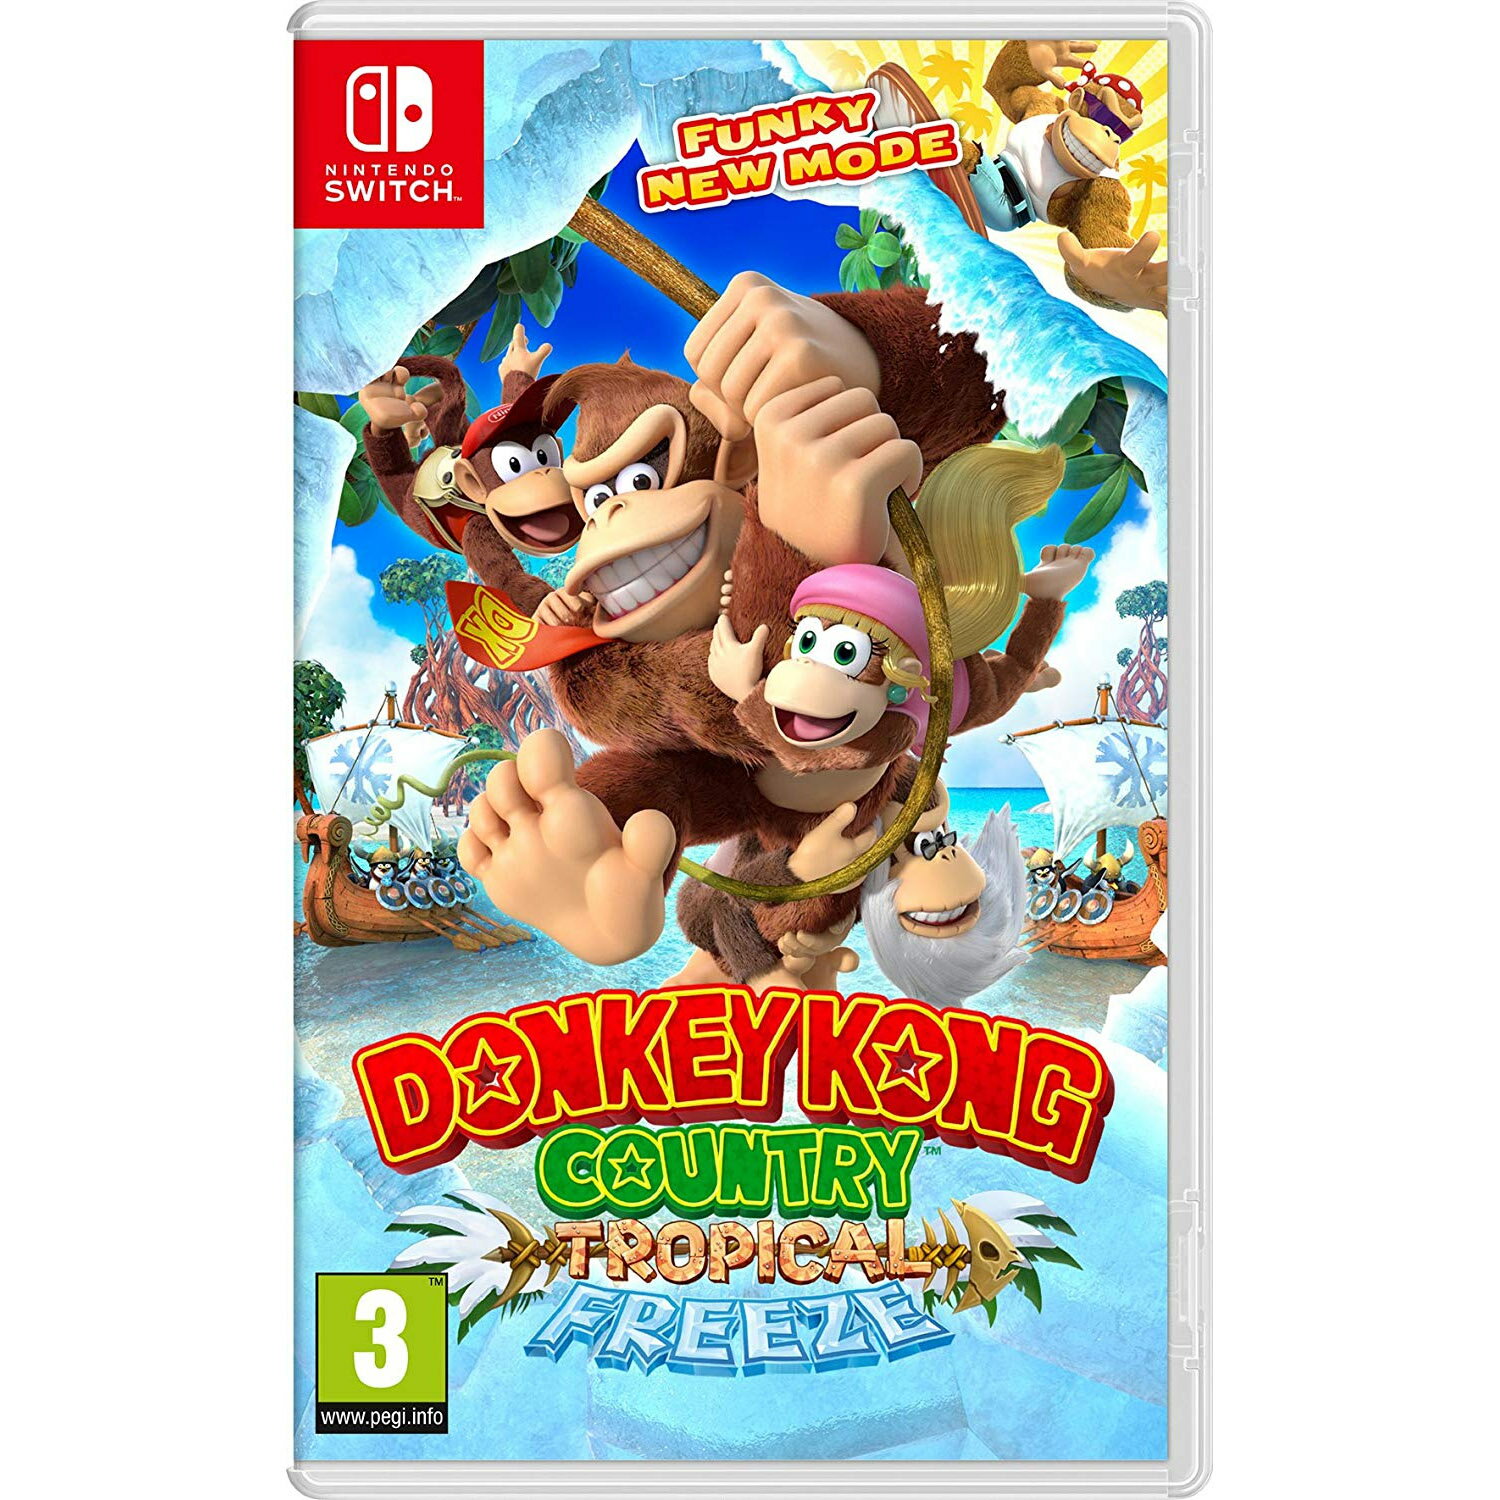 download donkey kong country 2 nintendo switch